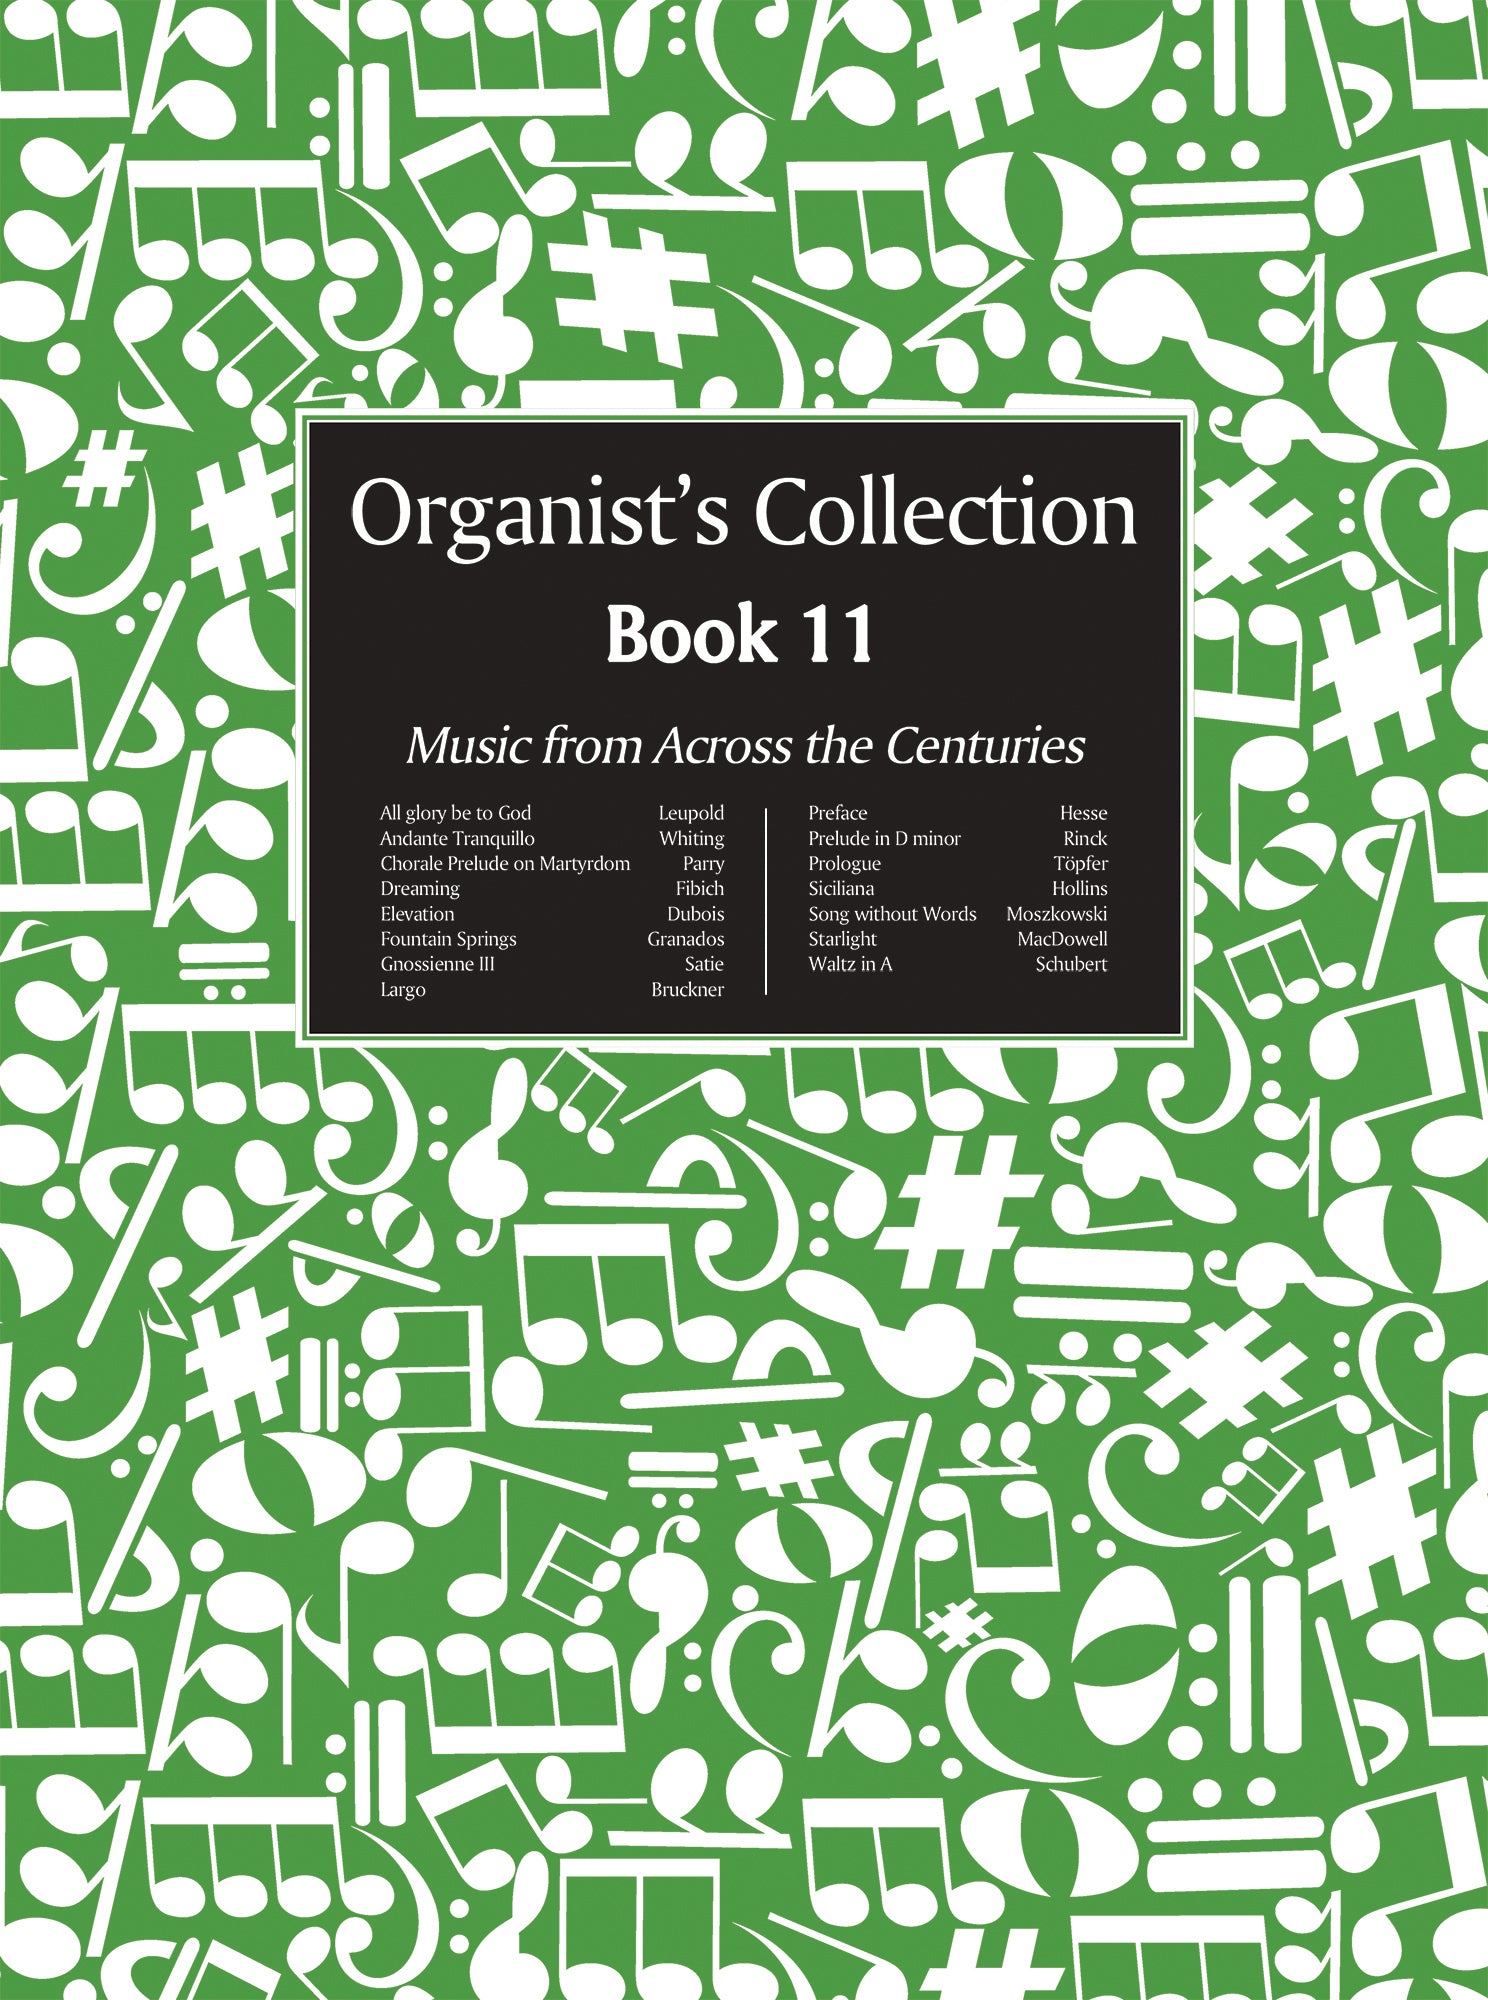 Organist's Collection Book 11